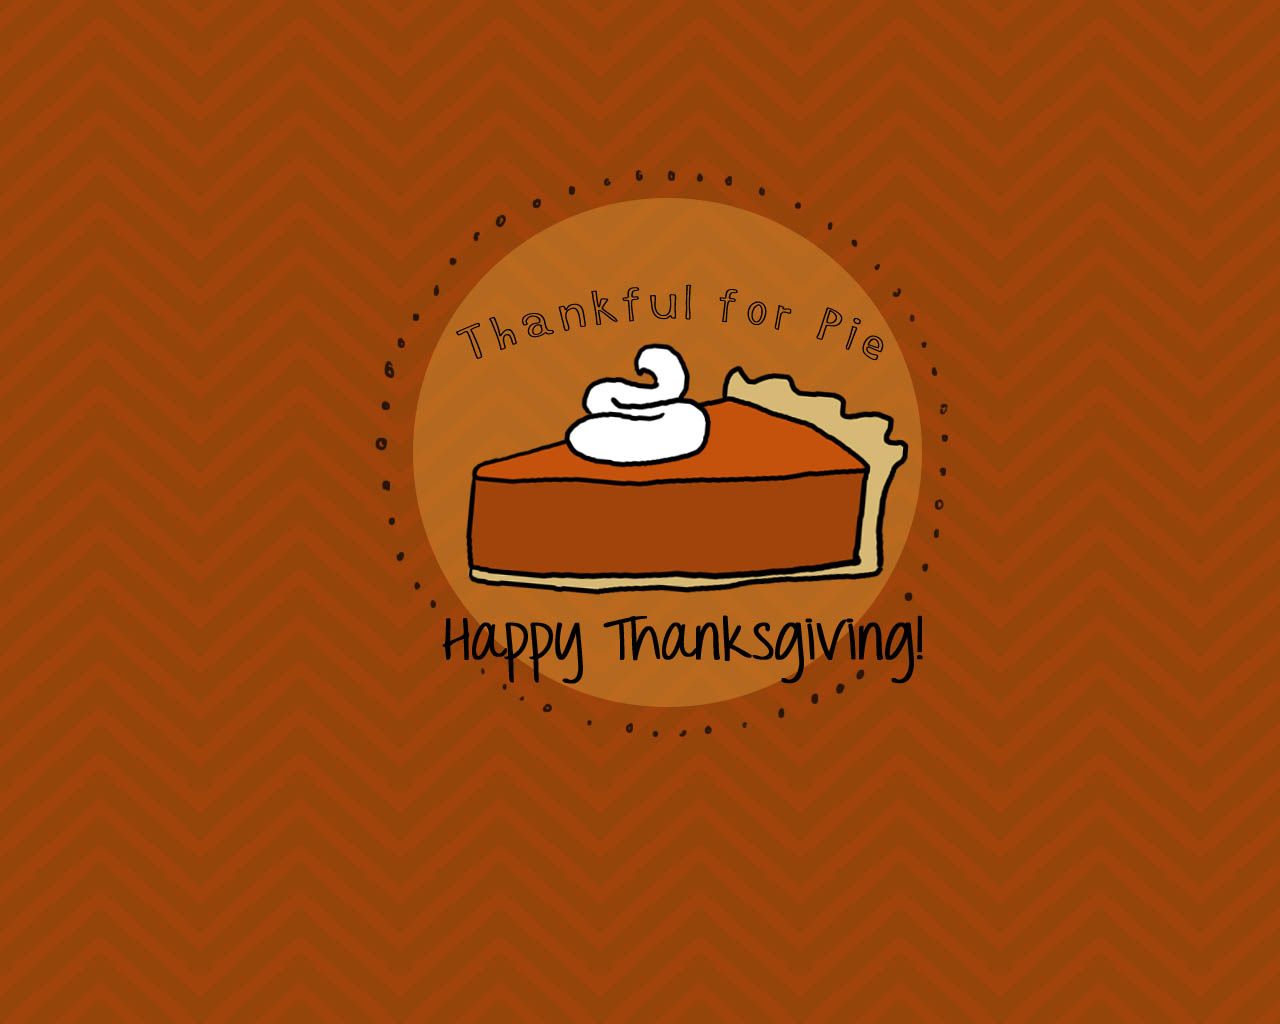 punk projects: Free Thanksgiving Desktop/iphone/ipad Backgrounds